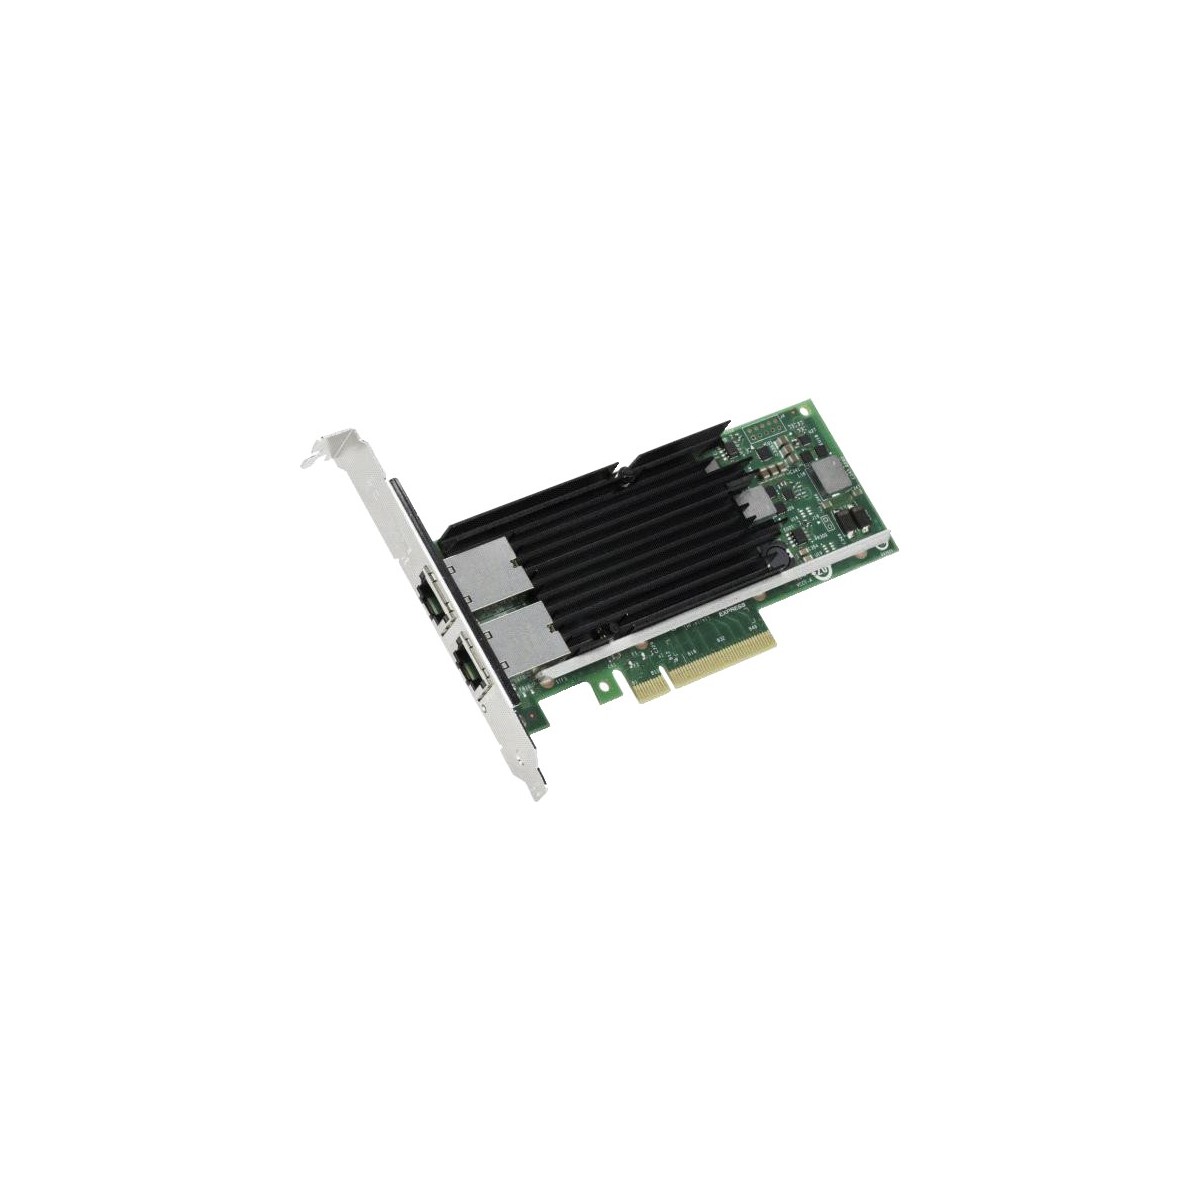 Intel X540T2BLK - Internal - Wired - PCI Express - Ethernet - 10000 Mbit/s